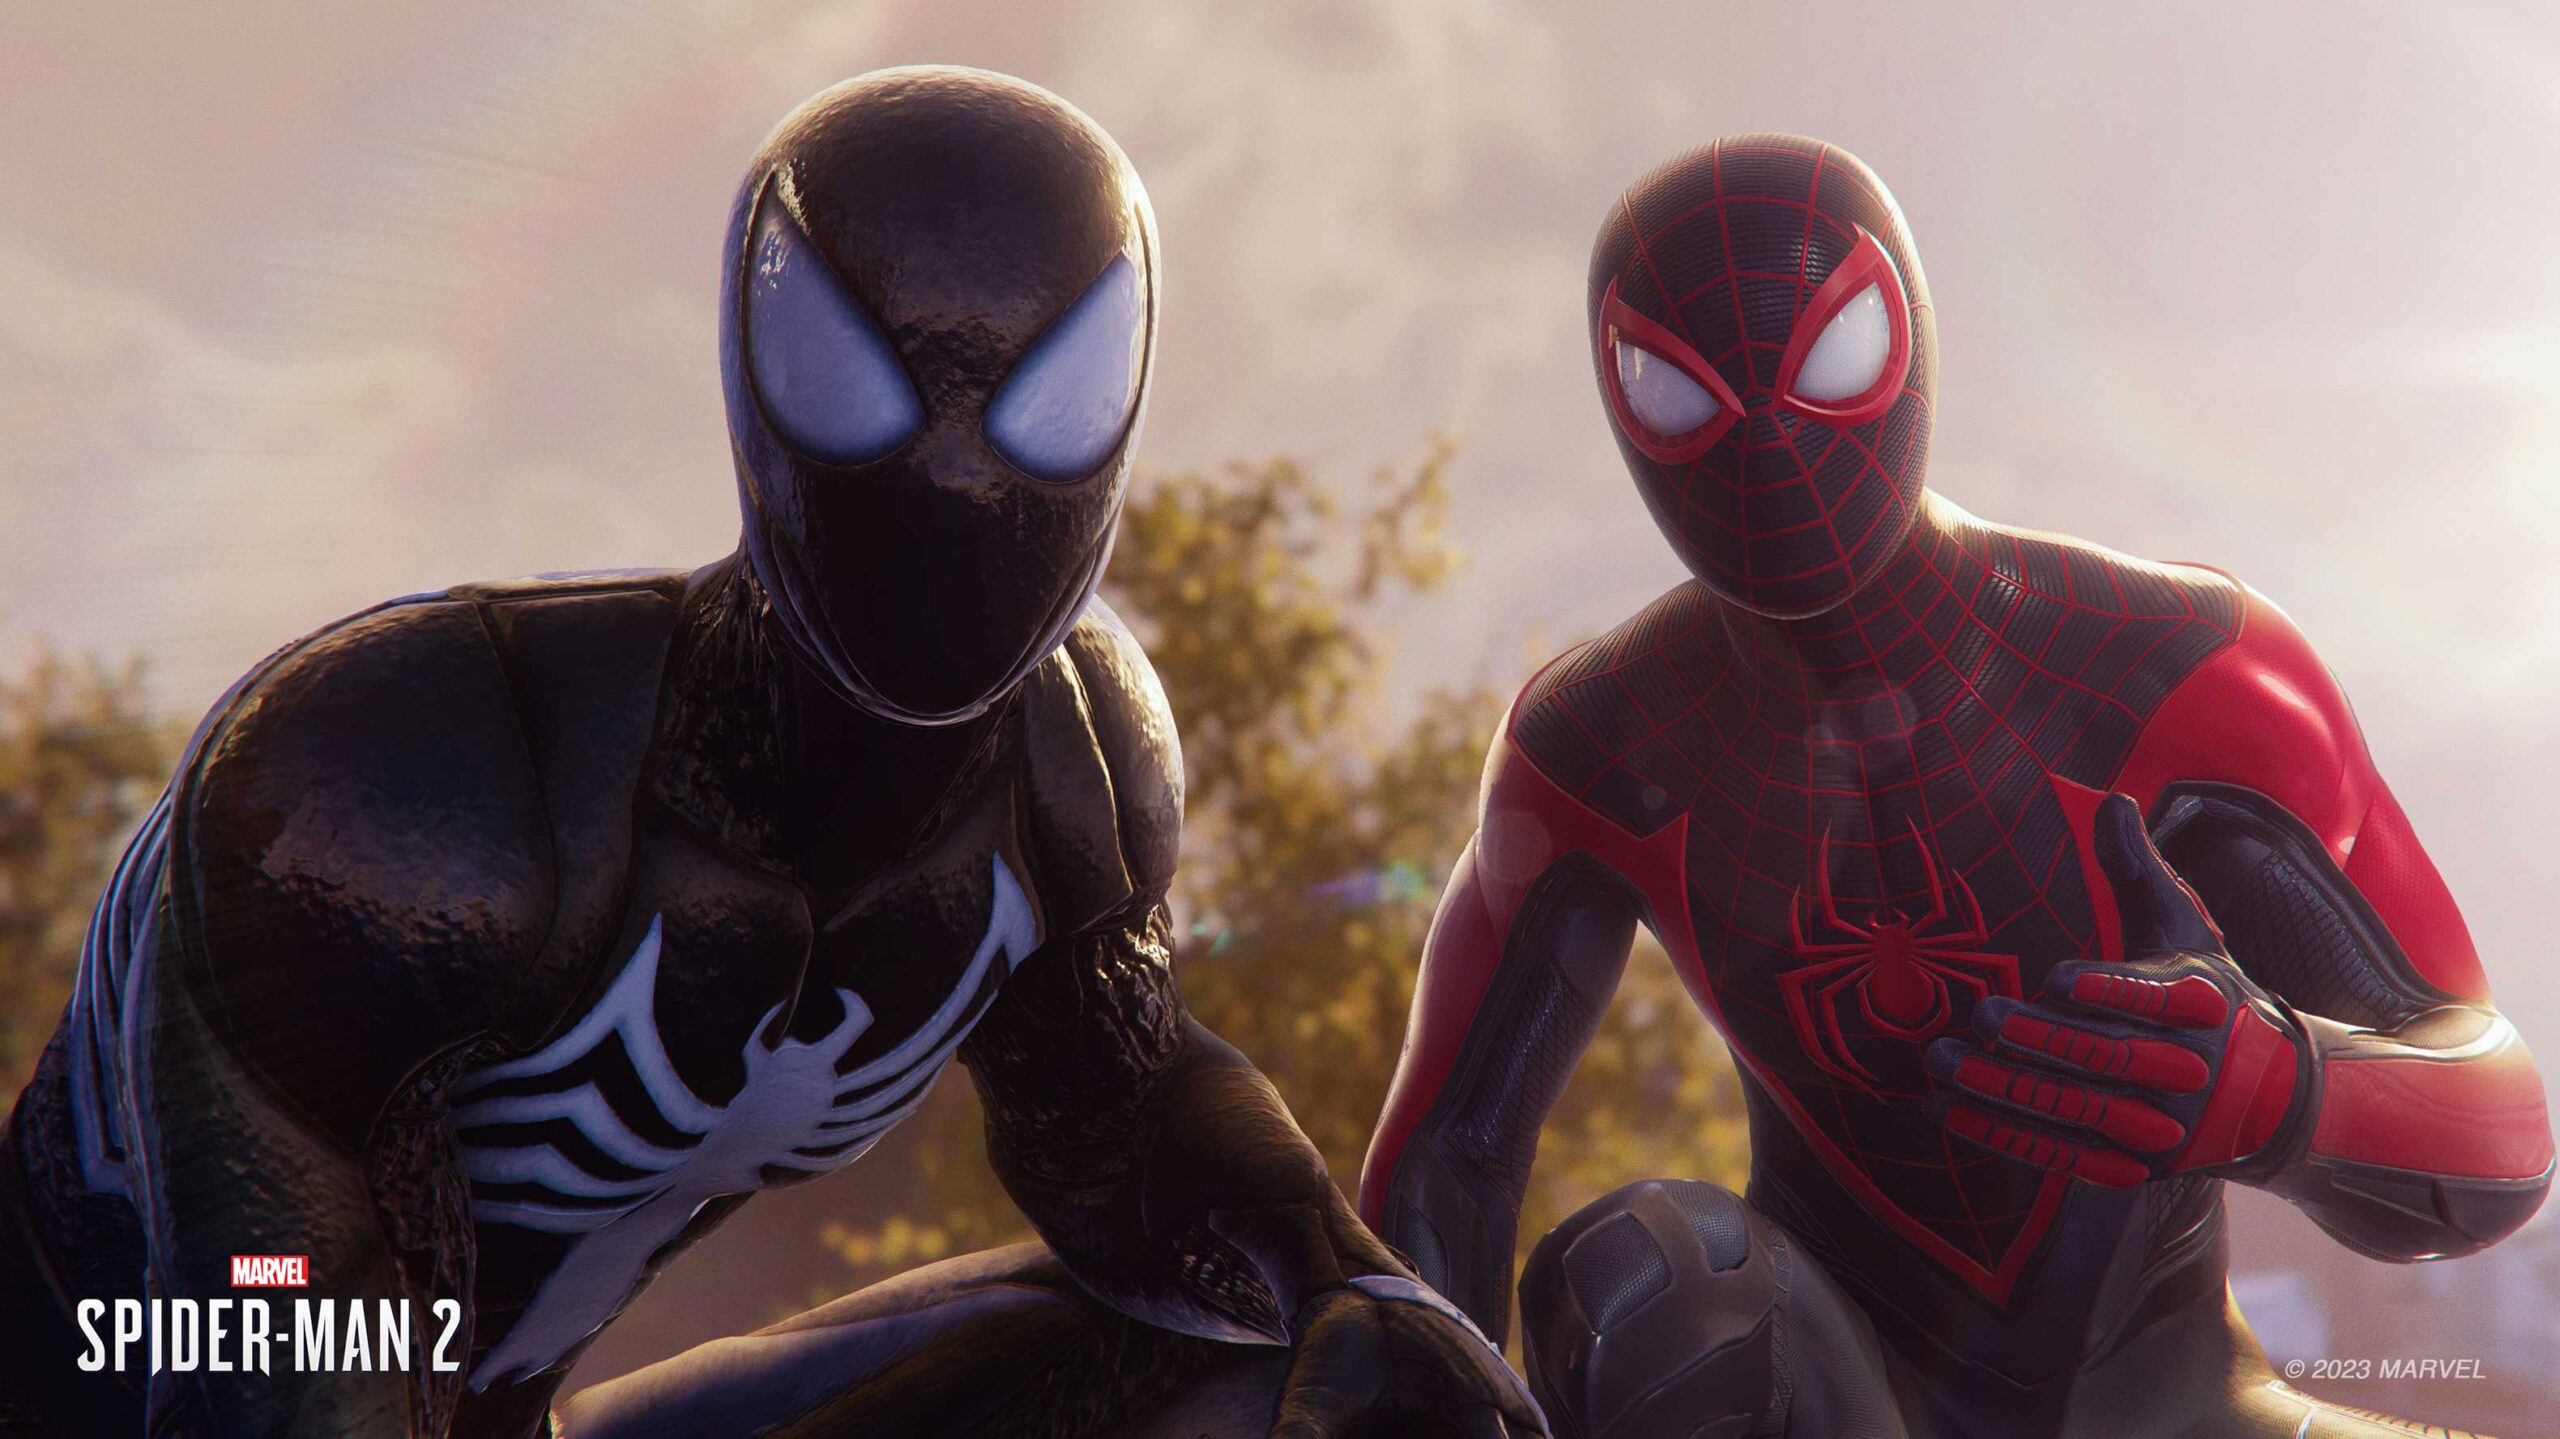 The Amazing Spider-Man 2 won't swing onto Xbox One at launch